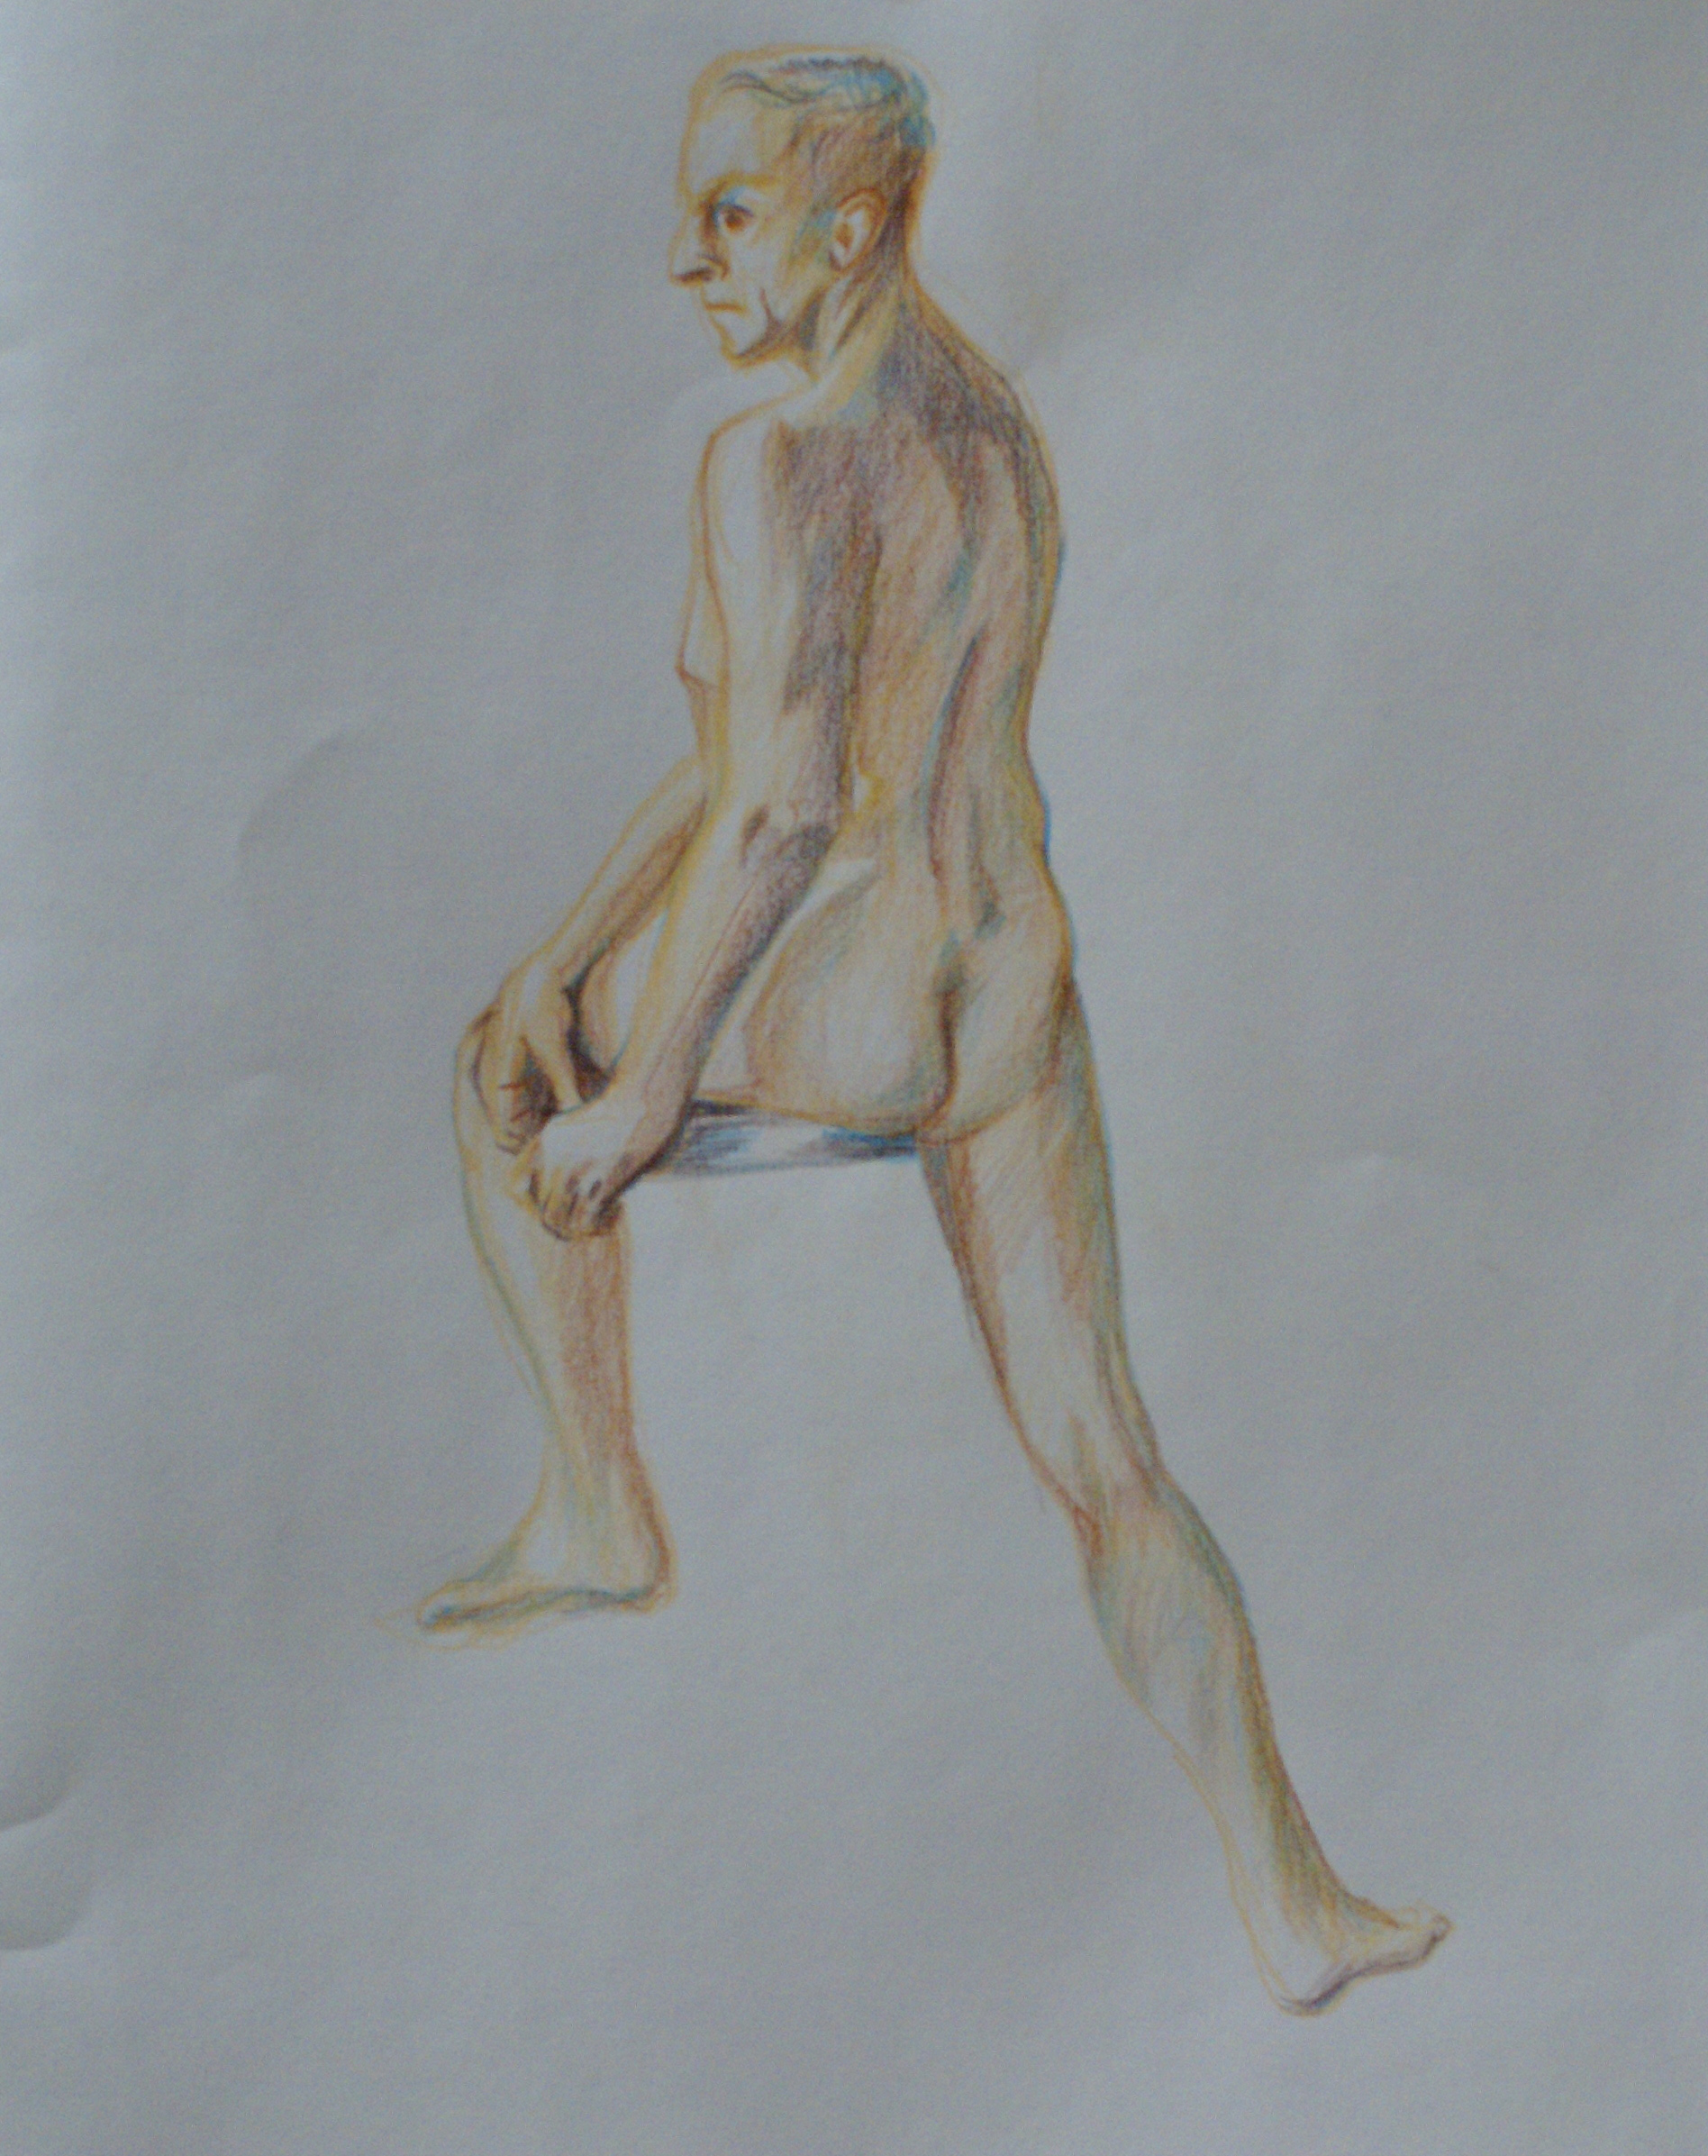 Orlando Rodriguez. Anatomy and Figure Drawing II. Charcoal and color pencil on toned paper. 18 x 24 in.